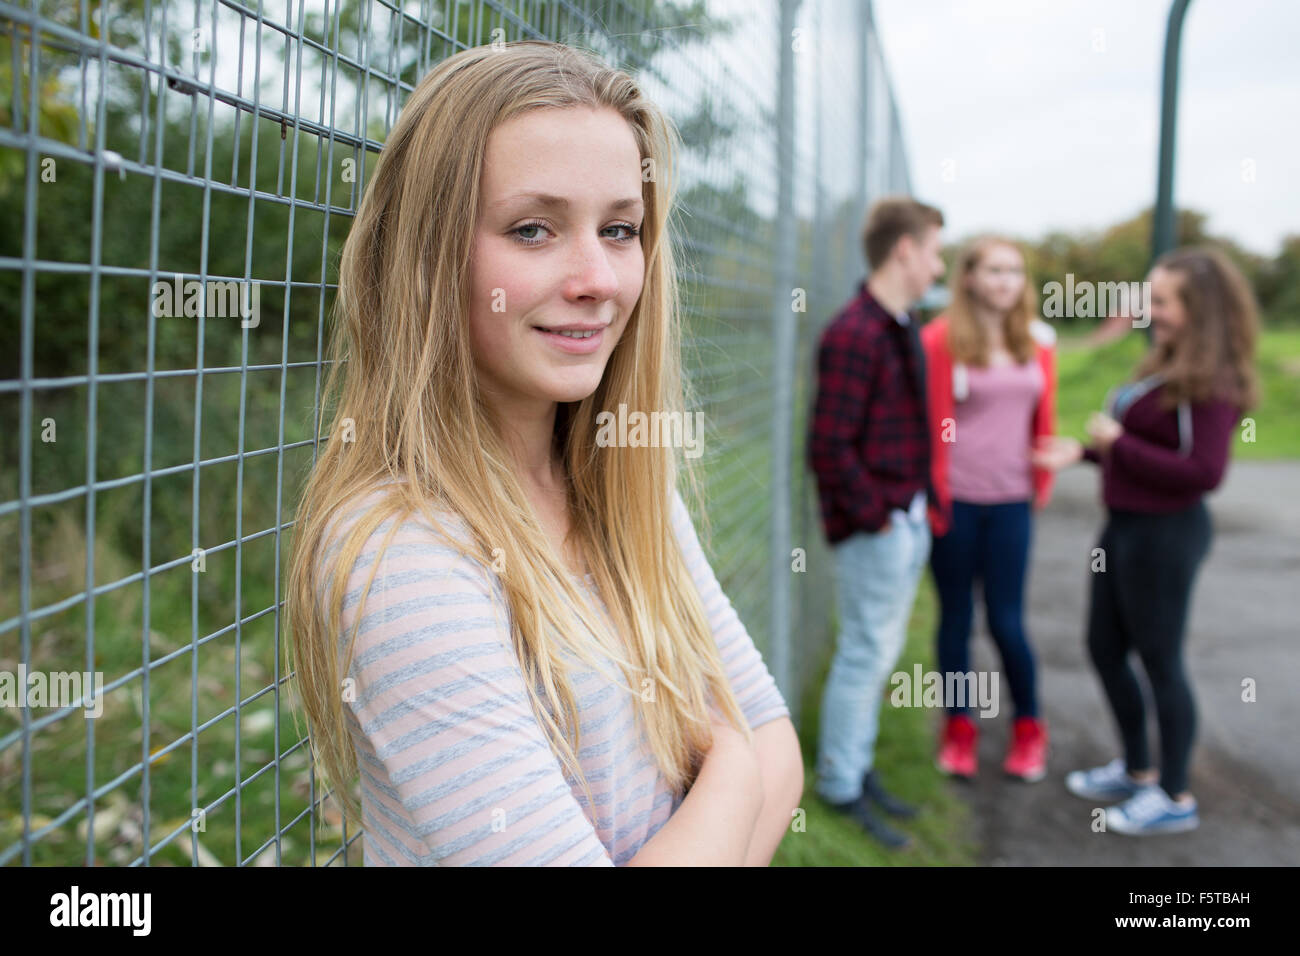 Portrait Of Teenage Girl Hanging Out With Friends In Playground Stock Photo